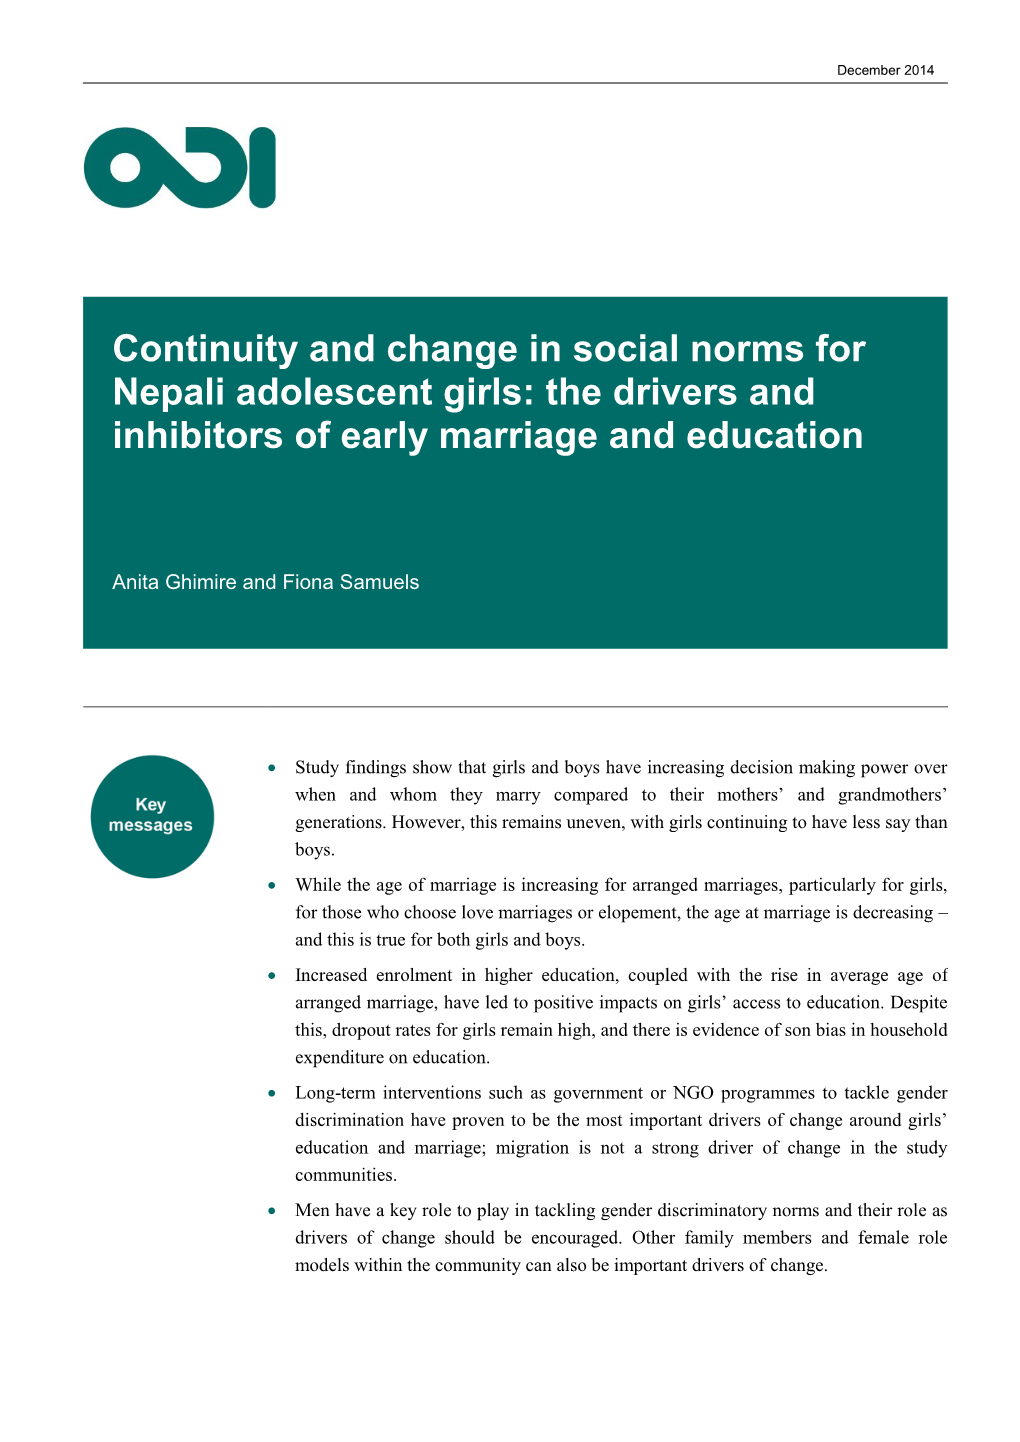 Continuity and Change in Social Norms for Nepali Adolescent Girls: the Drivers and Inhibitors of Early Marriage and Education